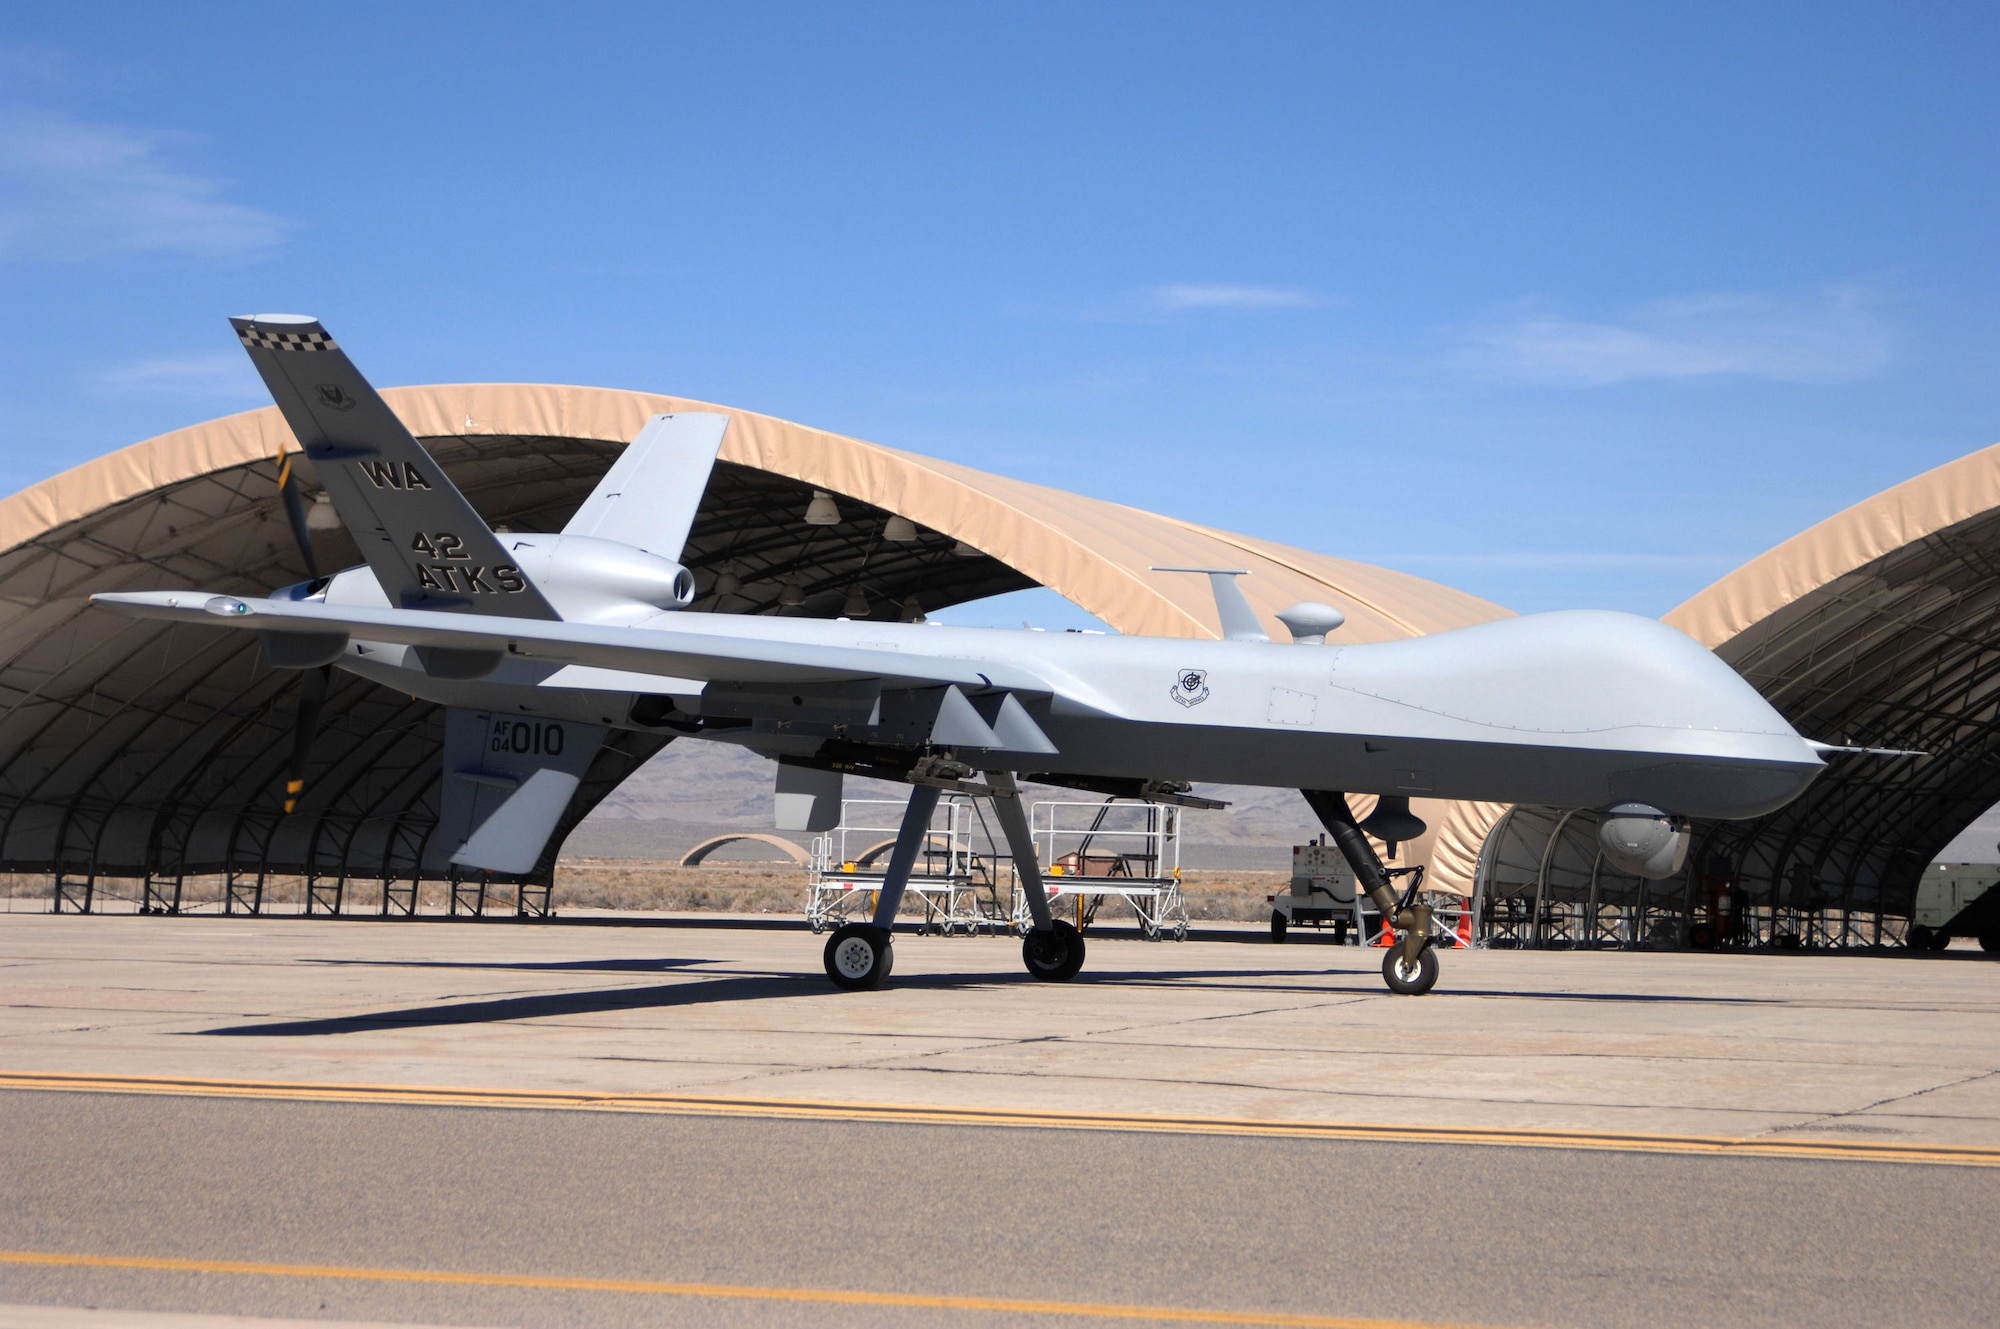 The MQ-9 Reaper Unmanned Aerial Vehicle taxis into Creech Air Force Base, Nev., Feb. 13 marking the first operational airframe of its kind to land here. This Reaper is the first of many soon to be assigned to the 42nd Attack Squadron. (U.S Air Force photo/Senior Airman Larry E. Reid Jr.)